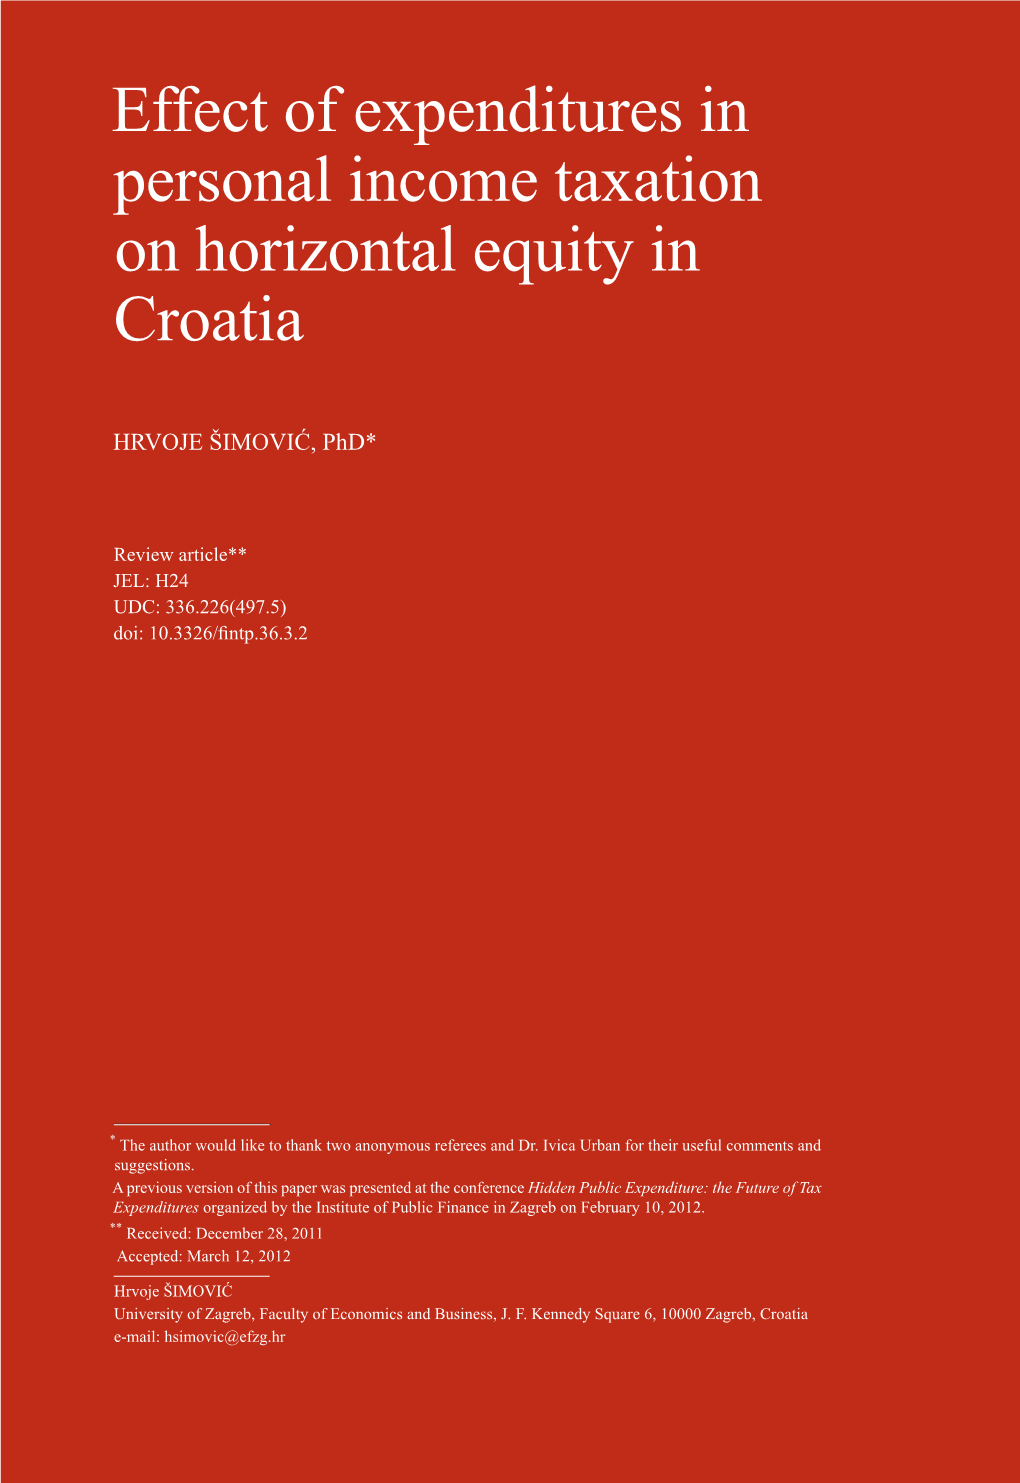 Effect of Expenditures in Personal Income Taxation on Horizontal Equity in Croatia